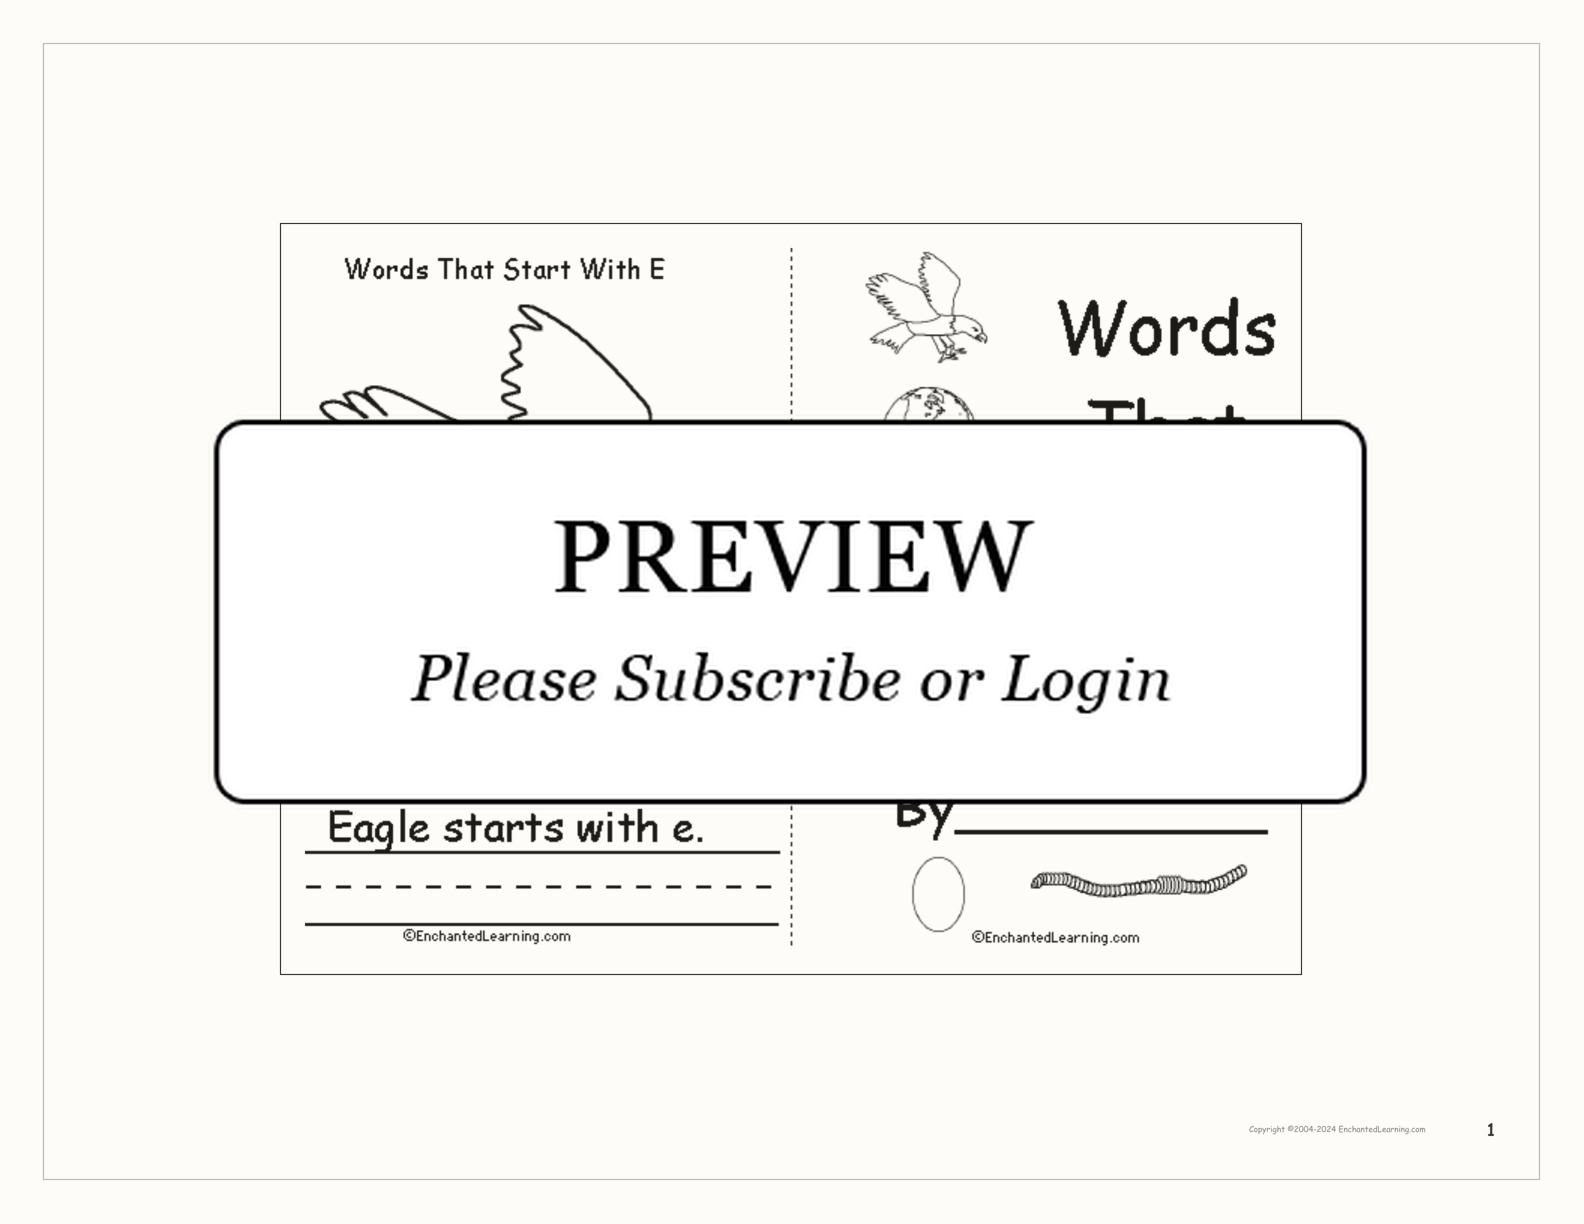 Words That Start With E interactive worksheet page 1